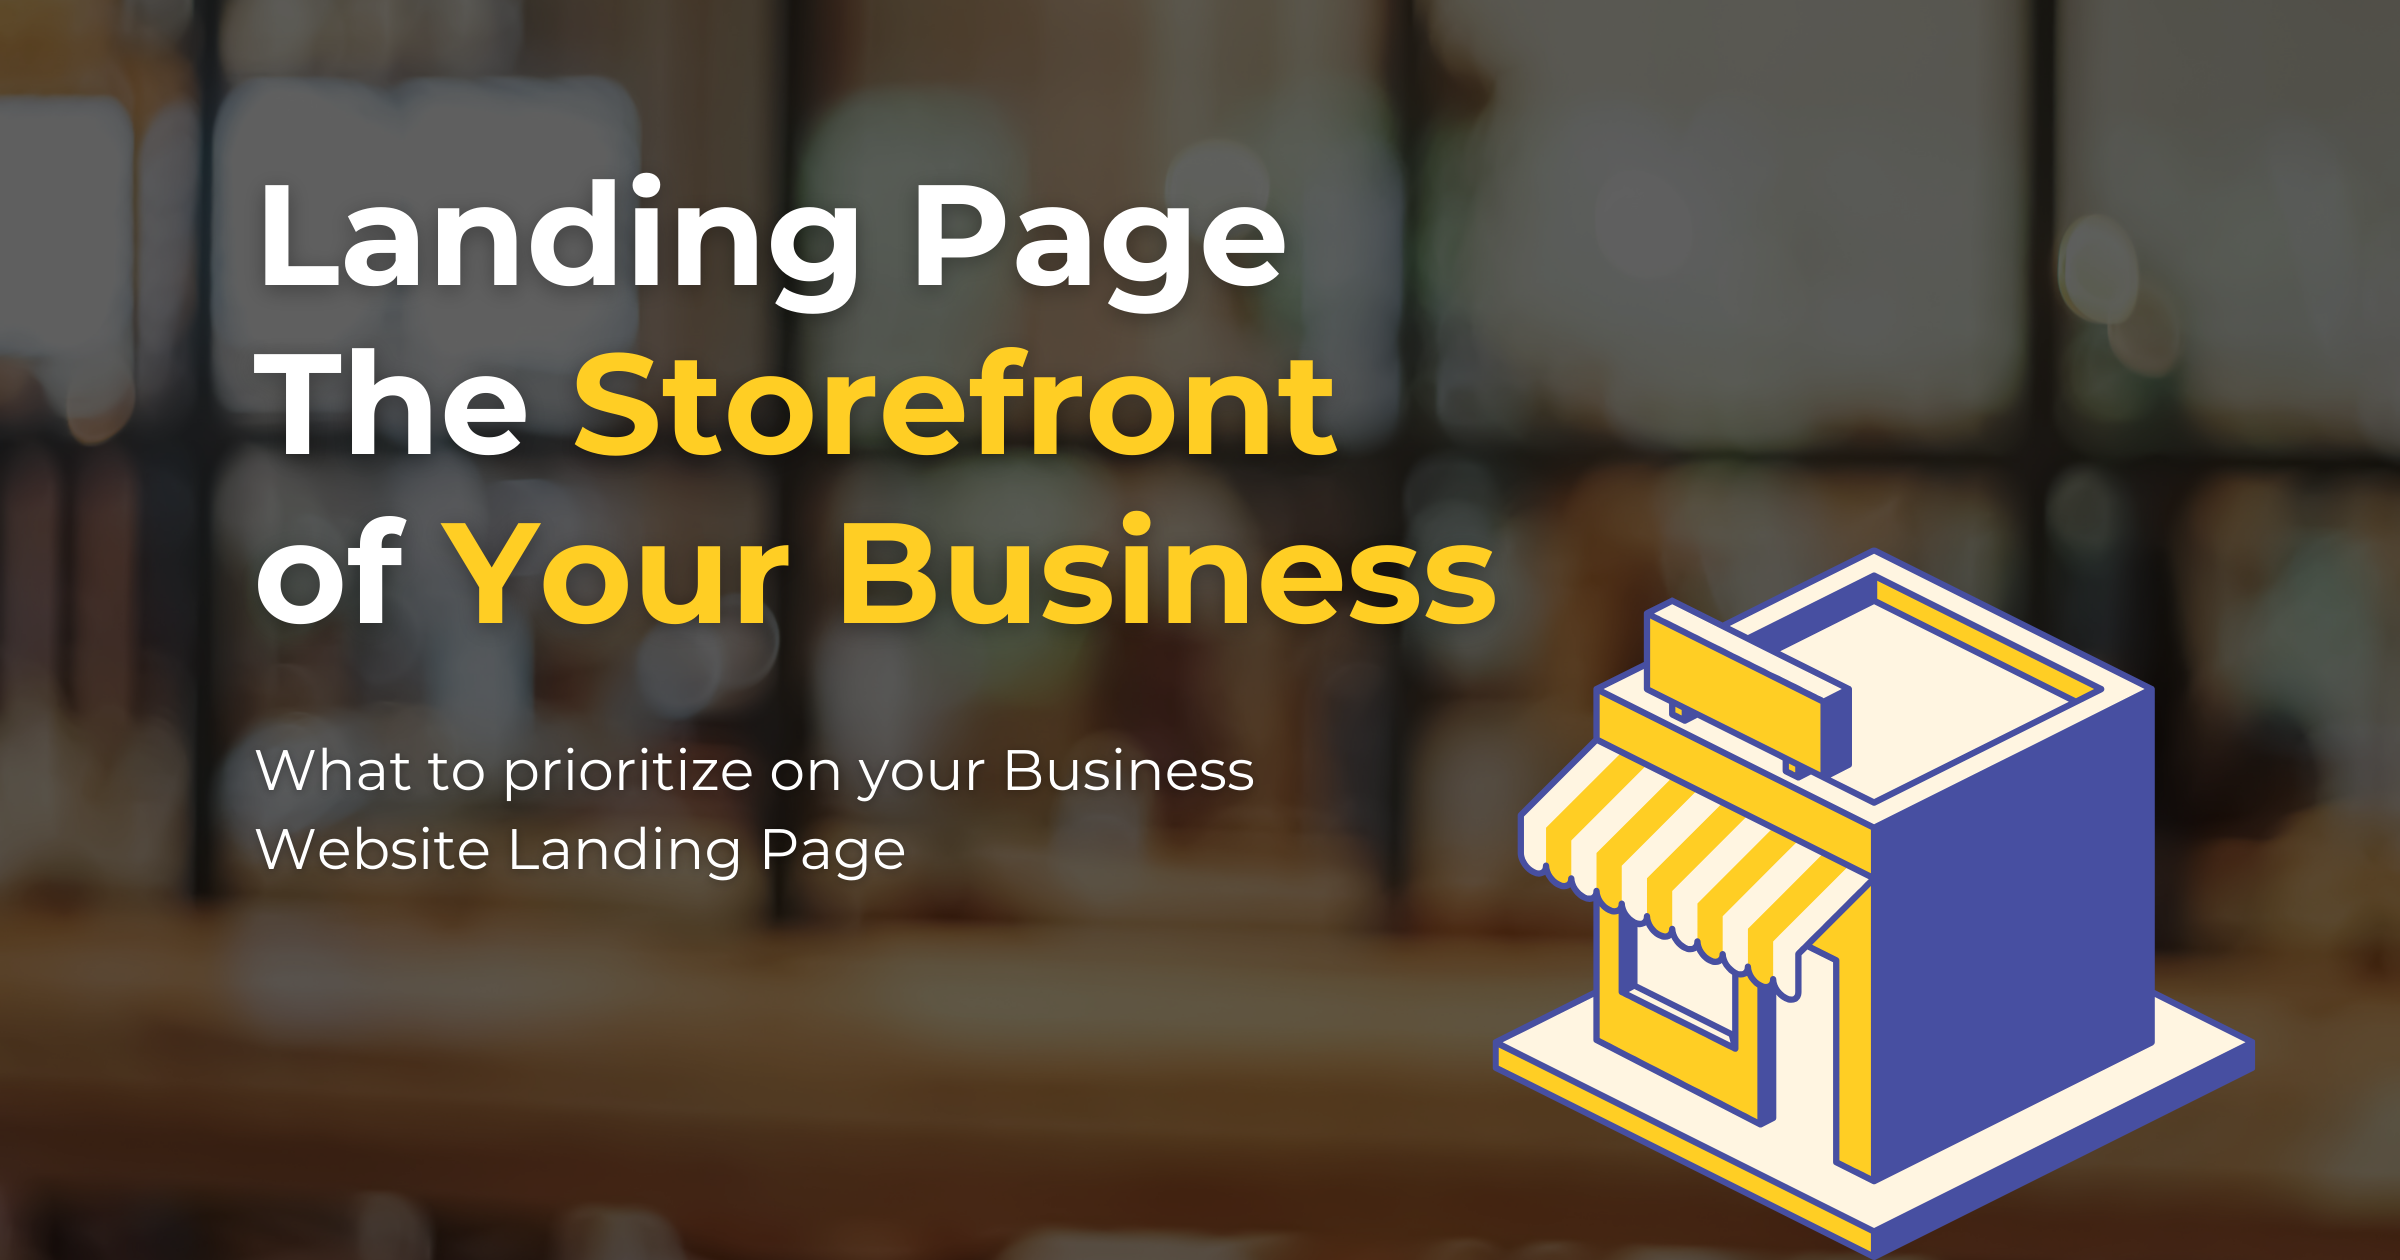 Building a Landing Page – The Storefront for a Startup